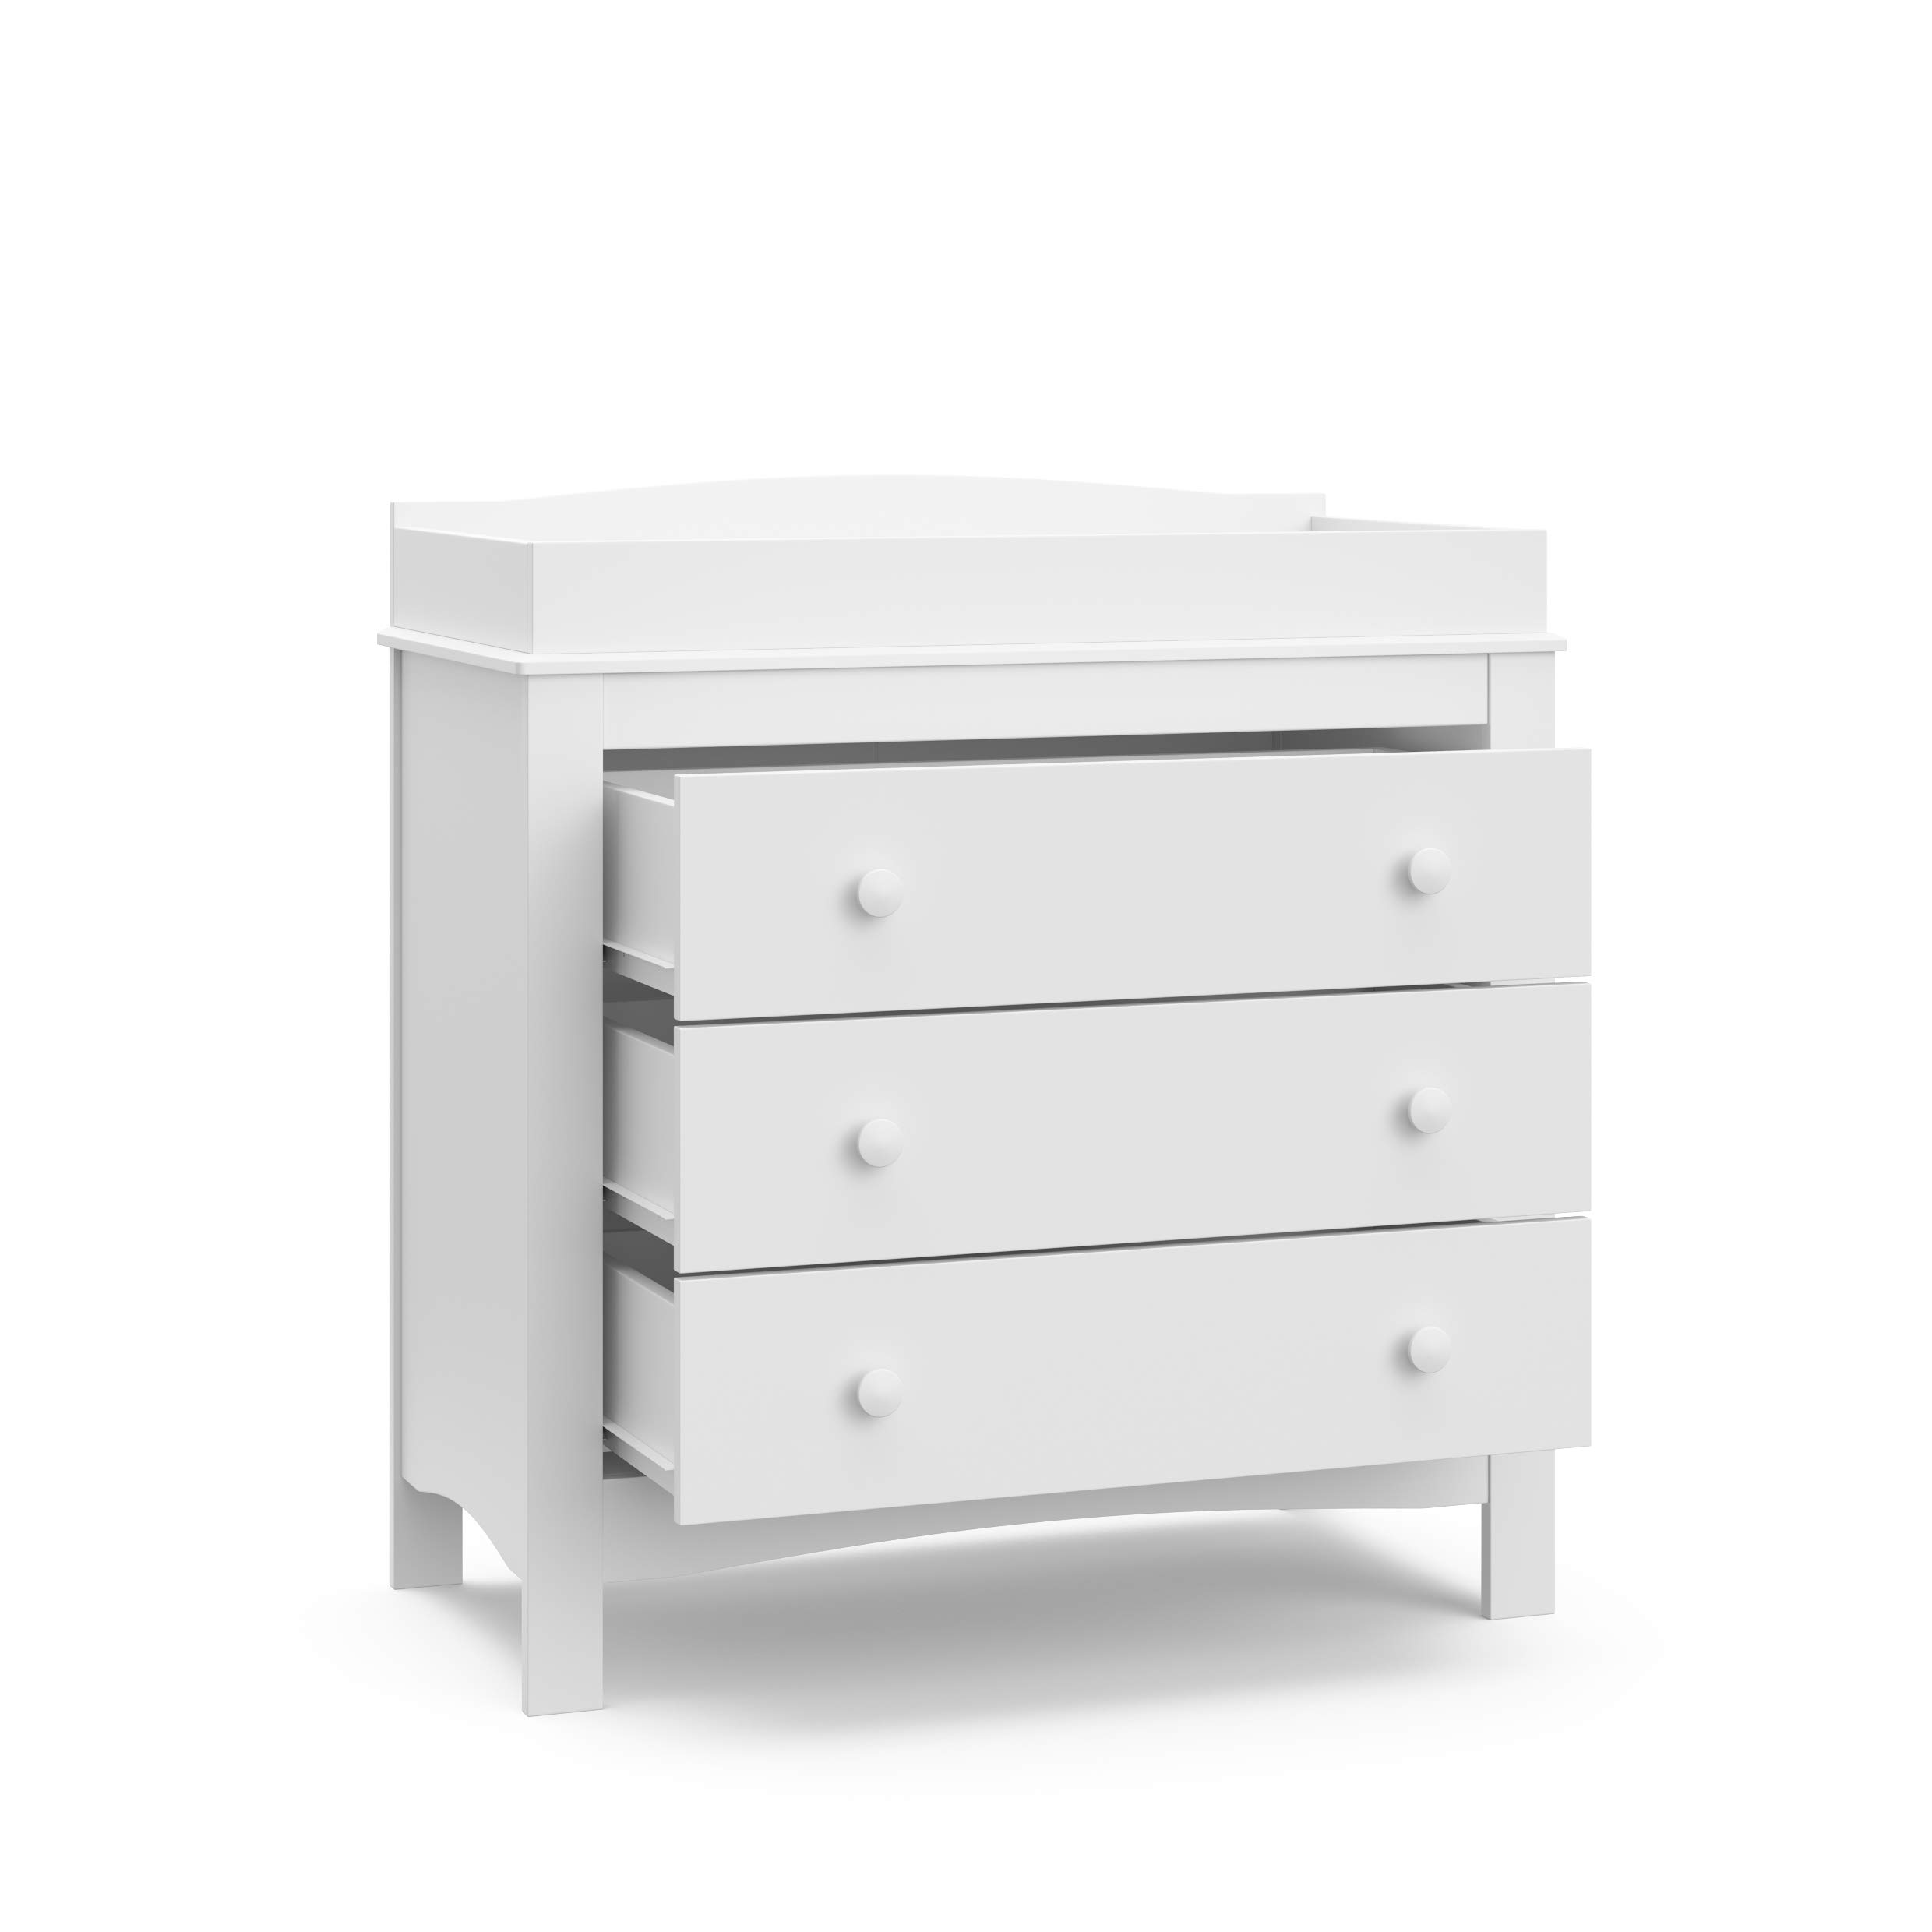 Graco Noah 3 Drawer Chest with Changing Topper (White) – GREENGUARD Gold Certified, Baby Dresser With Changing Table Top, Dresser for Nursery, 3 Drawer Kids Dresser